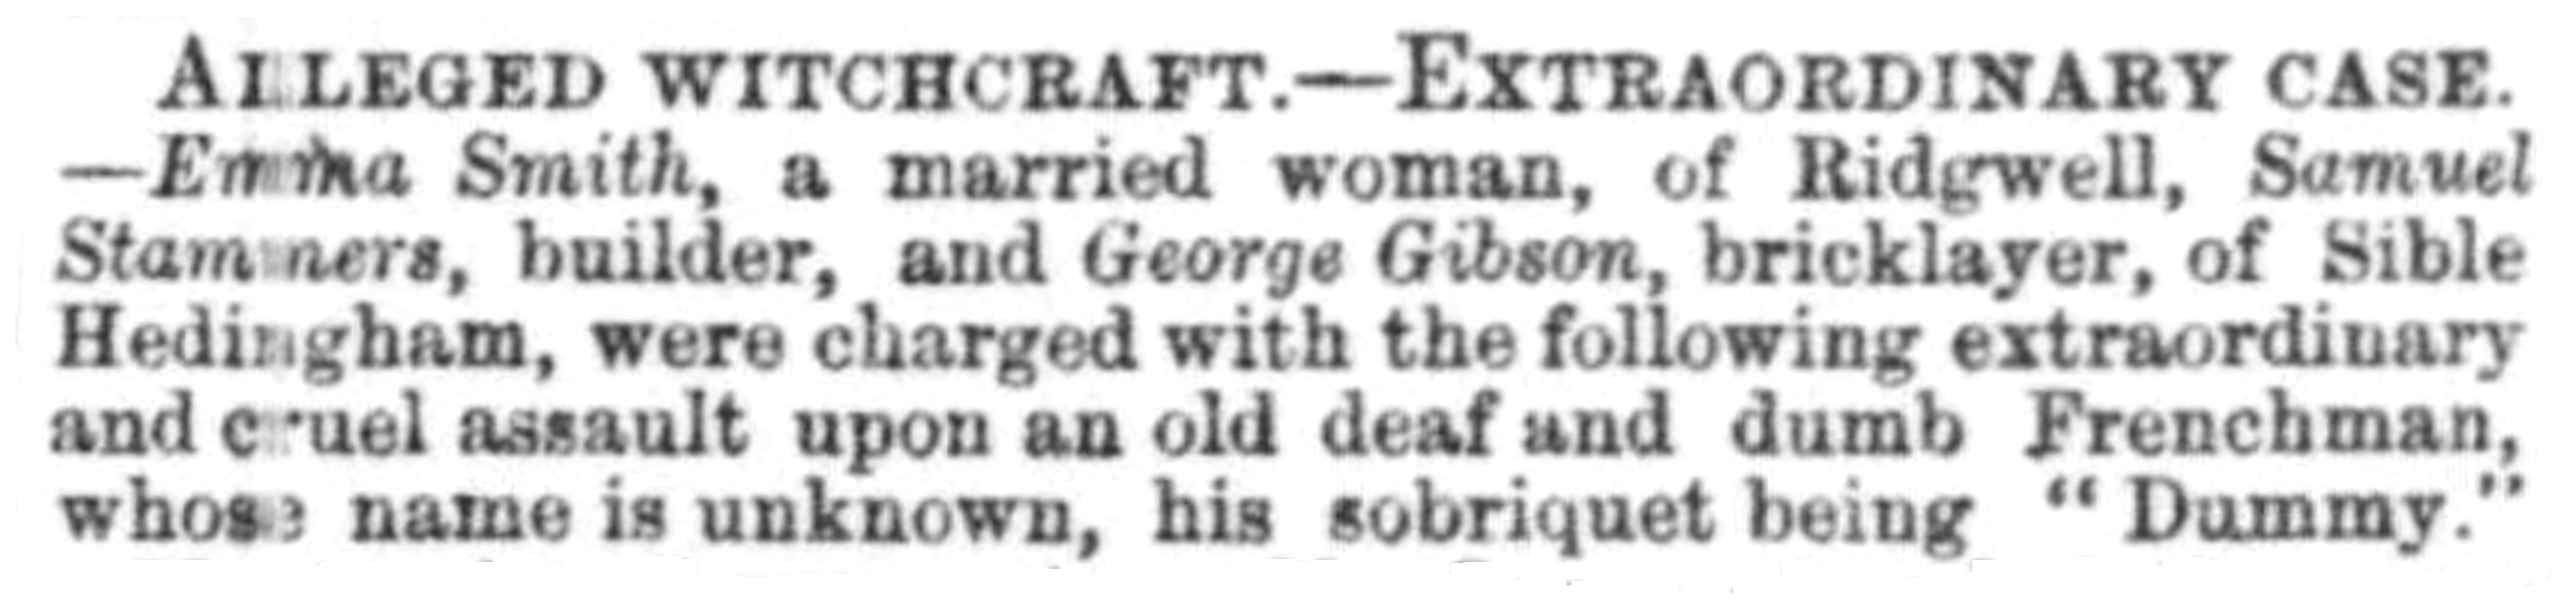 1863 newspaper report of the Essex incident "Alleged Witchcraft"